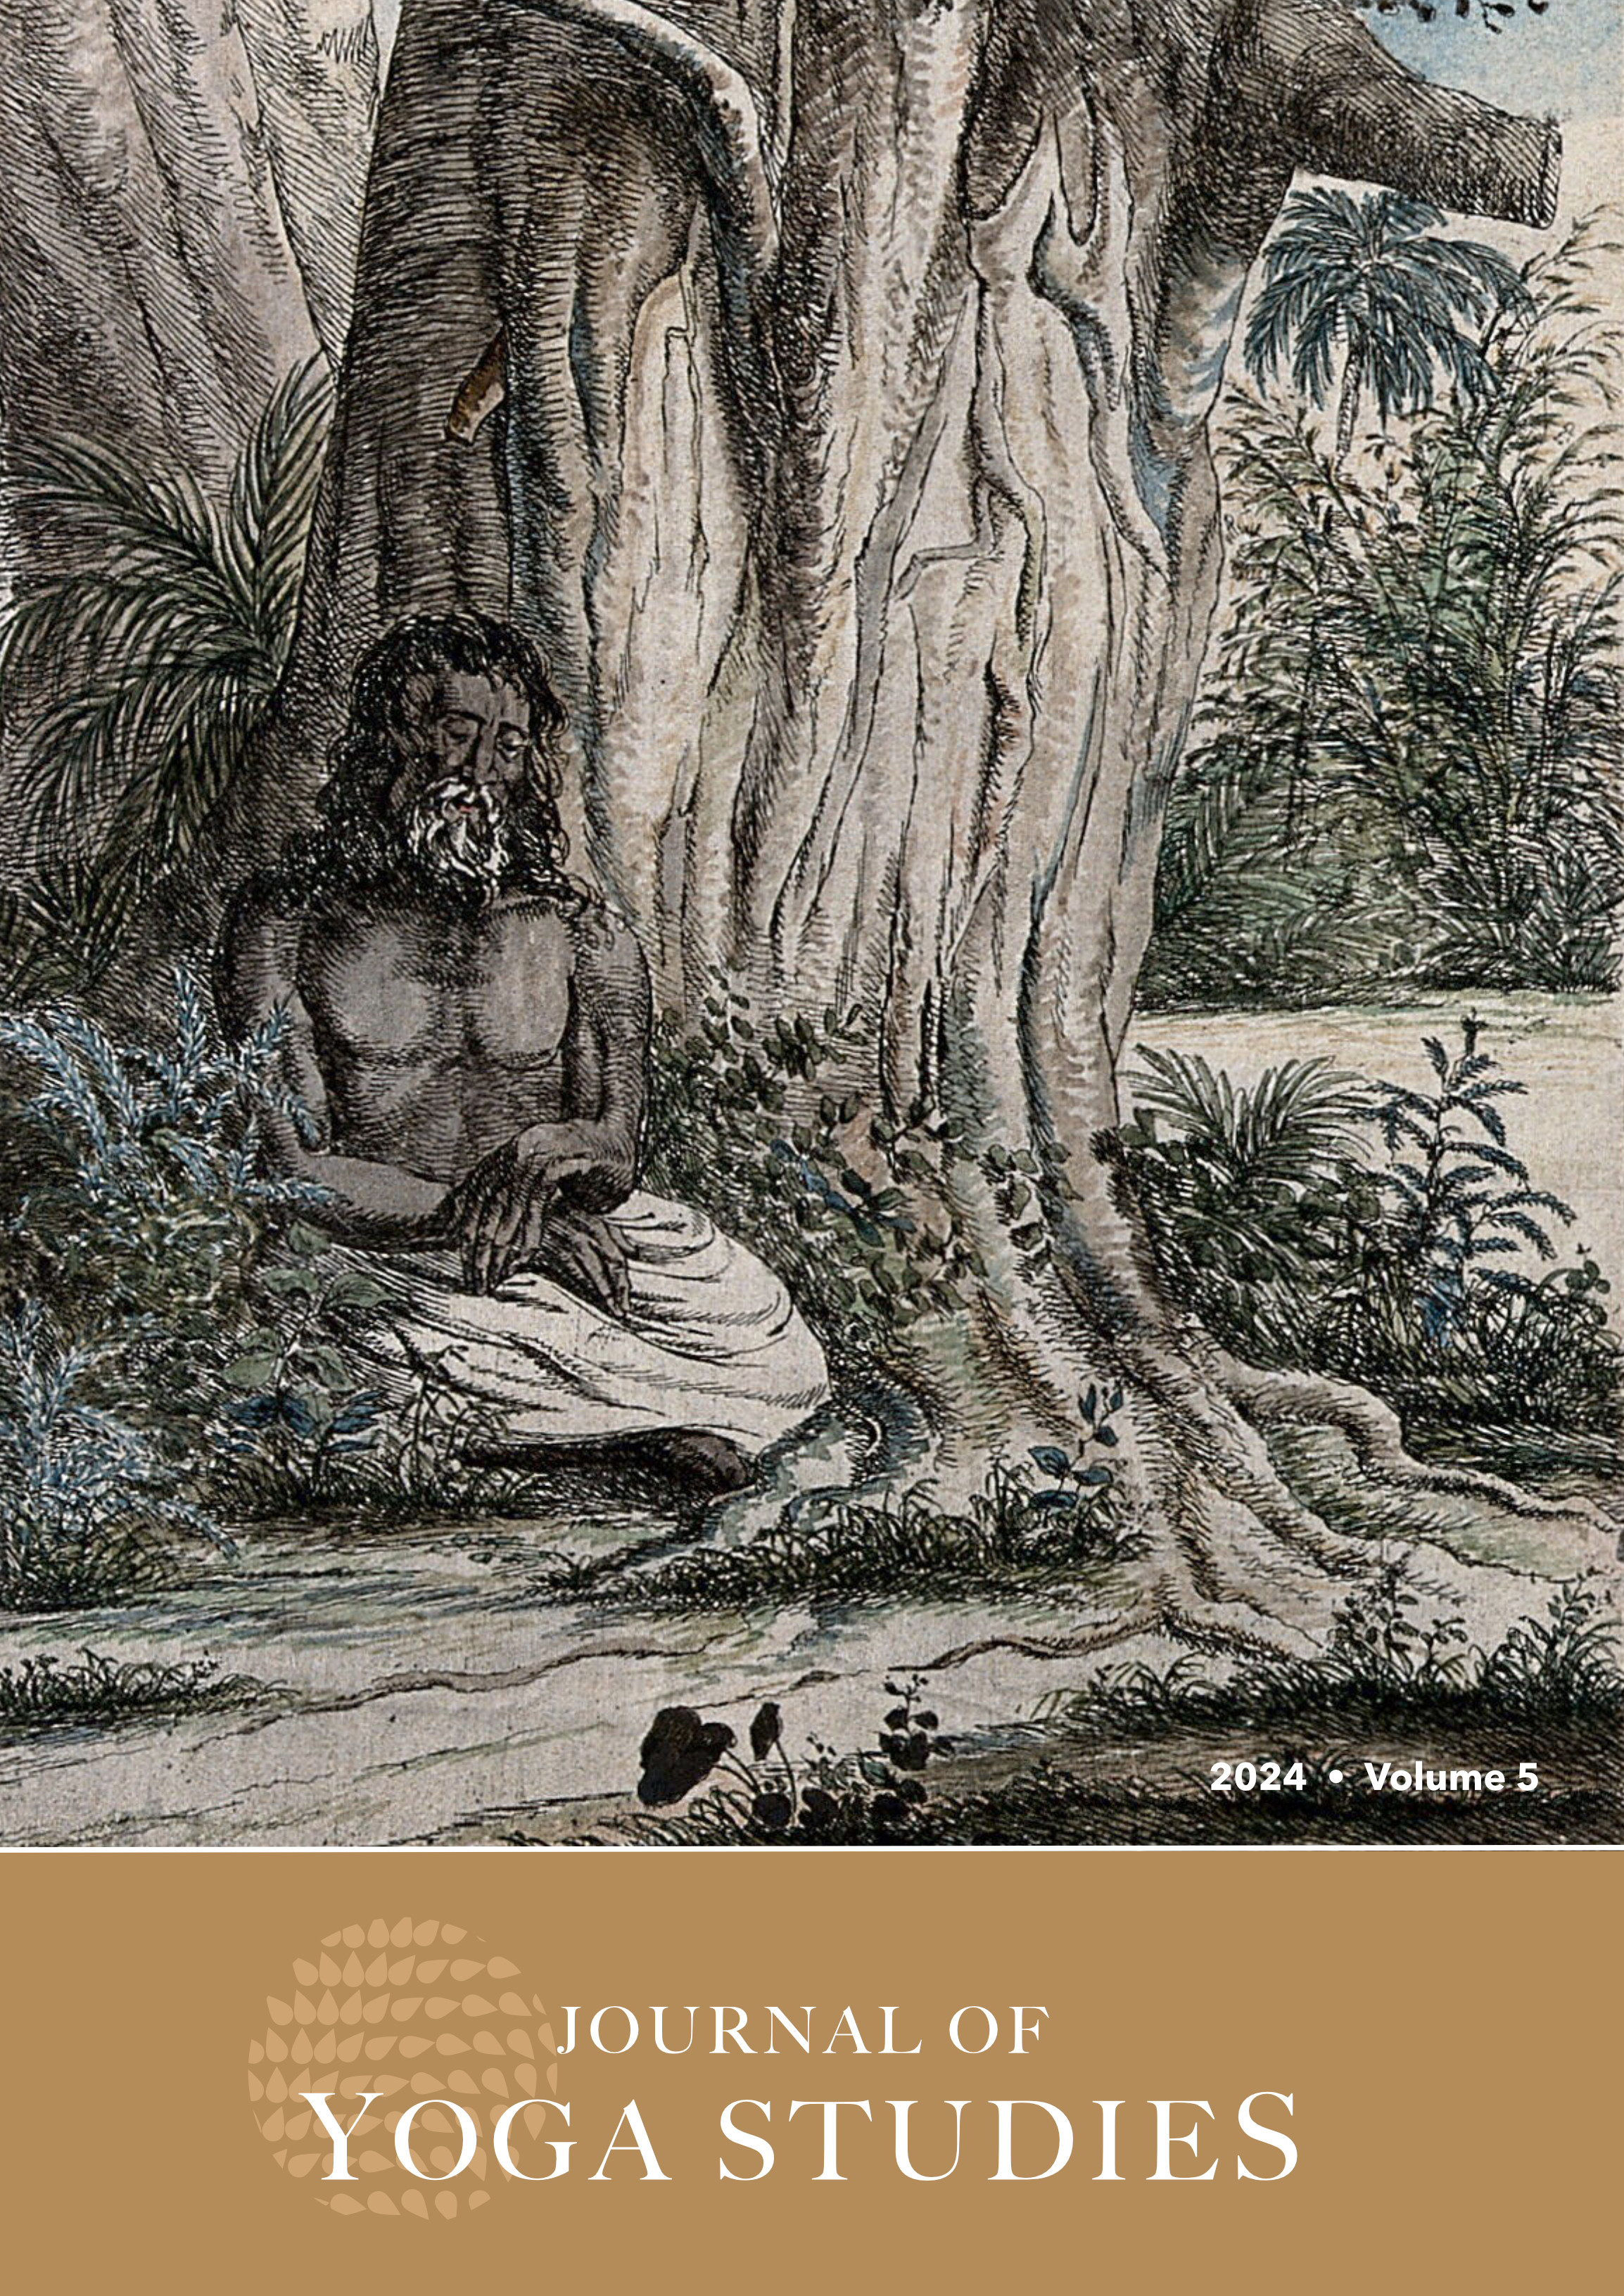 Journal of Yoga Studies, Volume 5 (2024) with an illustration of a Hindu ascetic seated under a tree, near Calcutta, West Bengal. Coloured etching by François Balthazar Solvyns, 1799. Wellcome Collection.